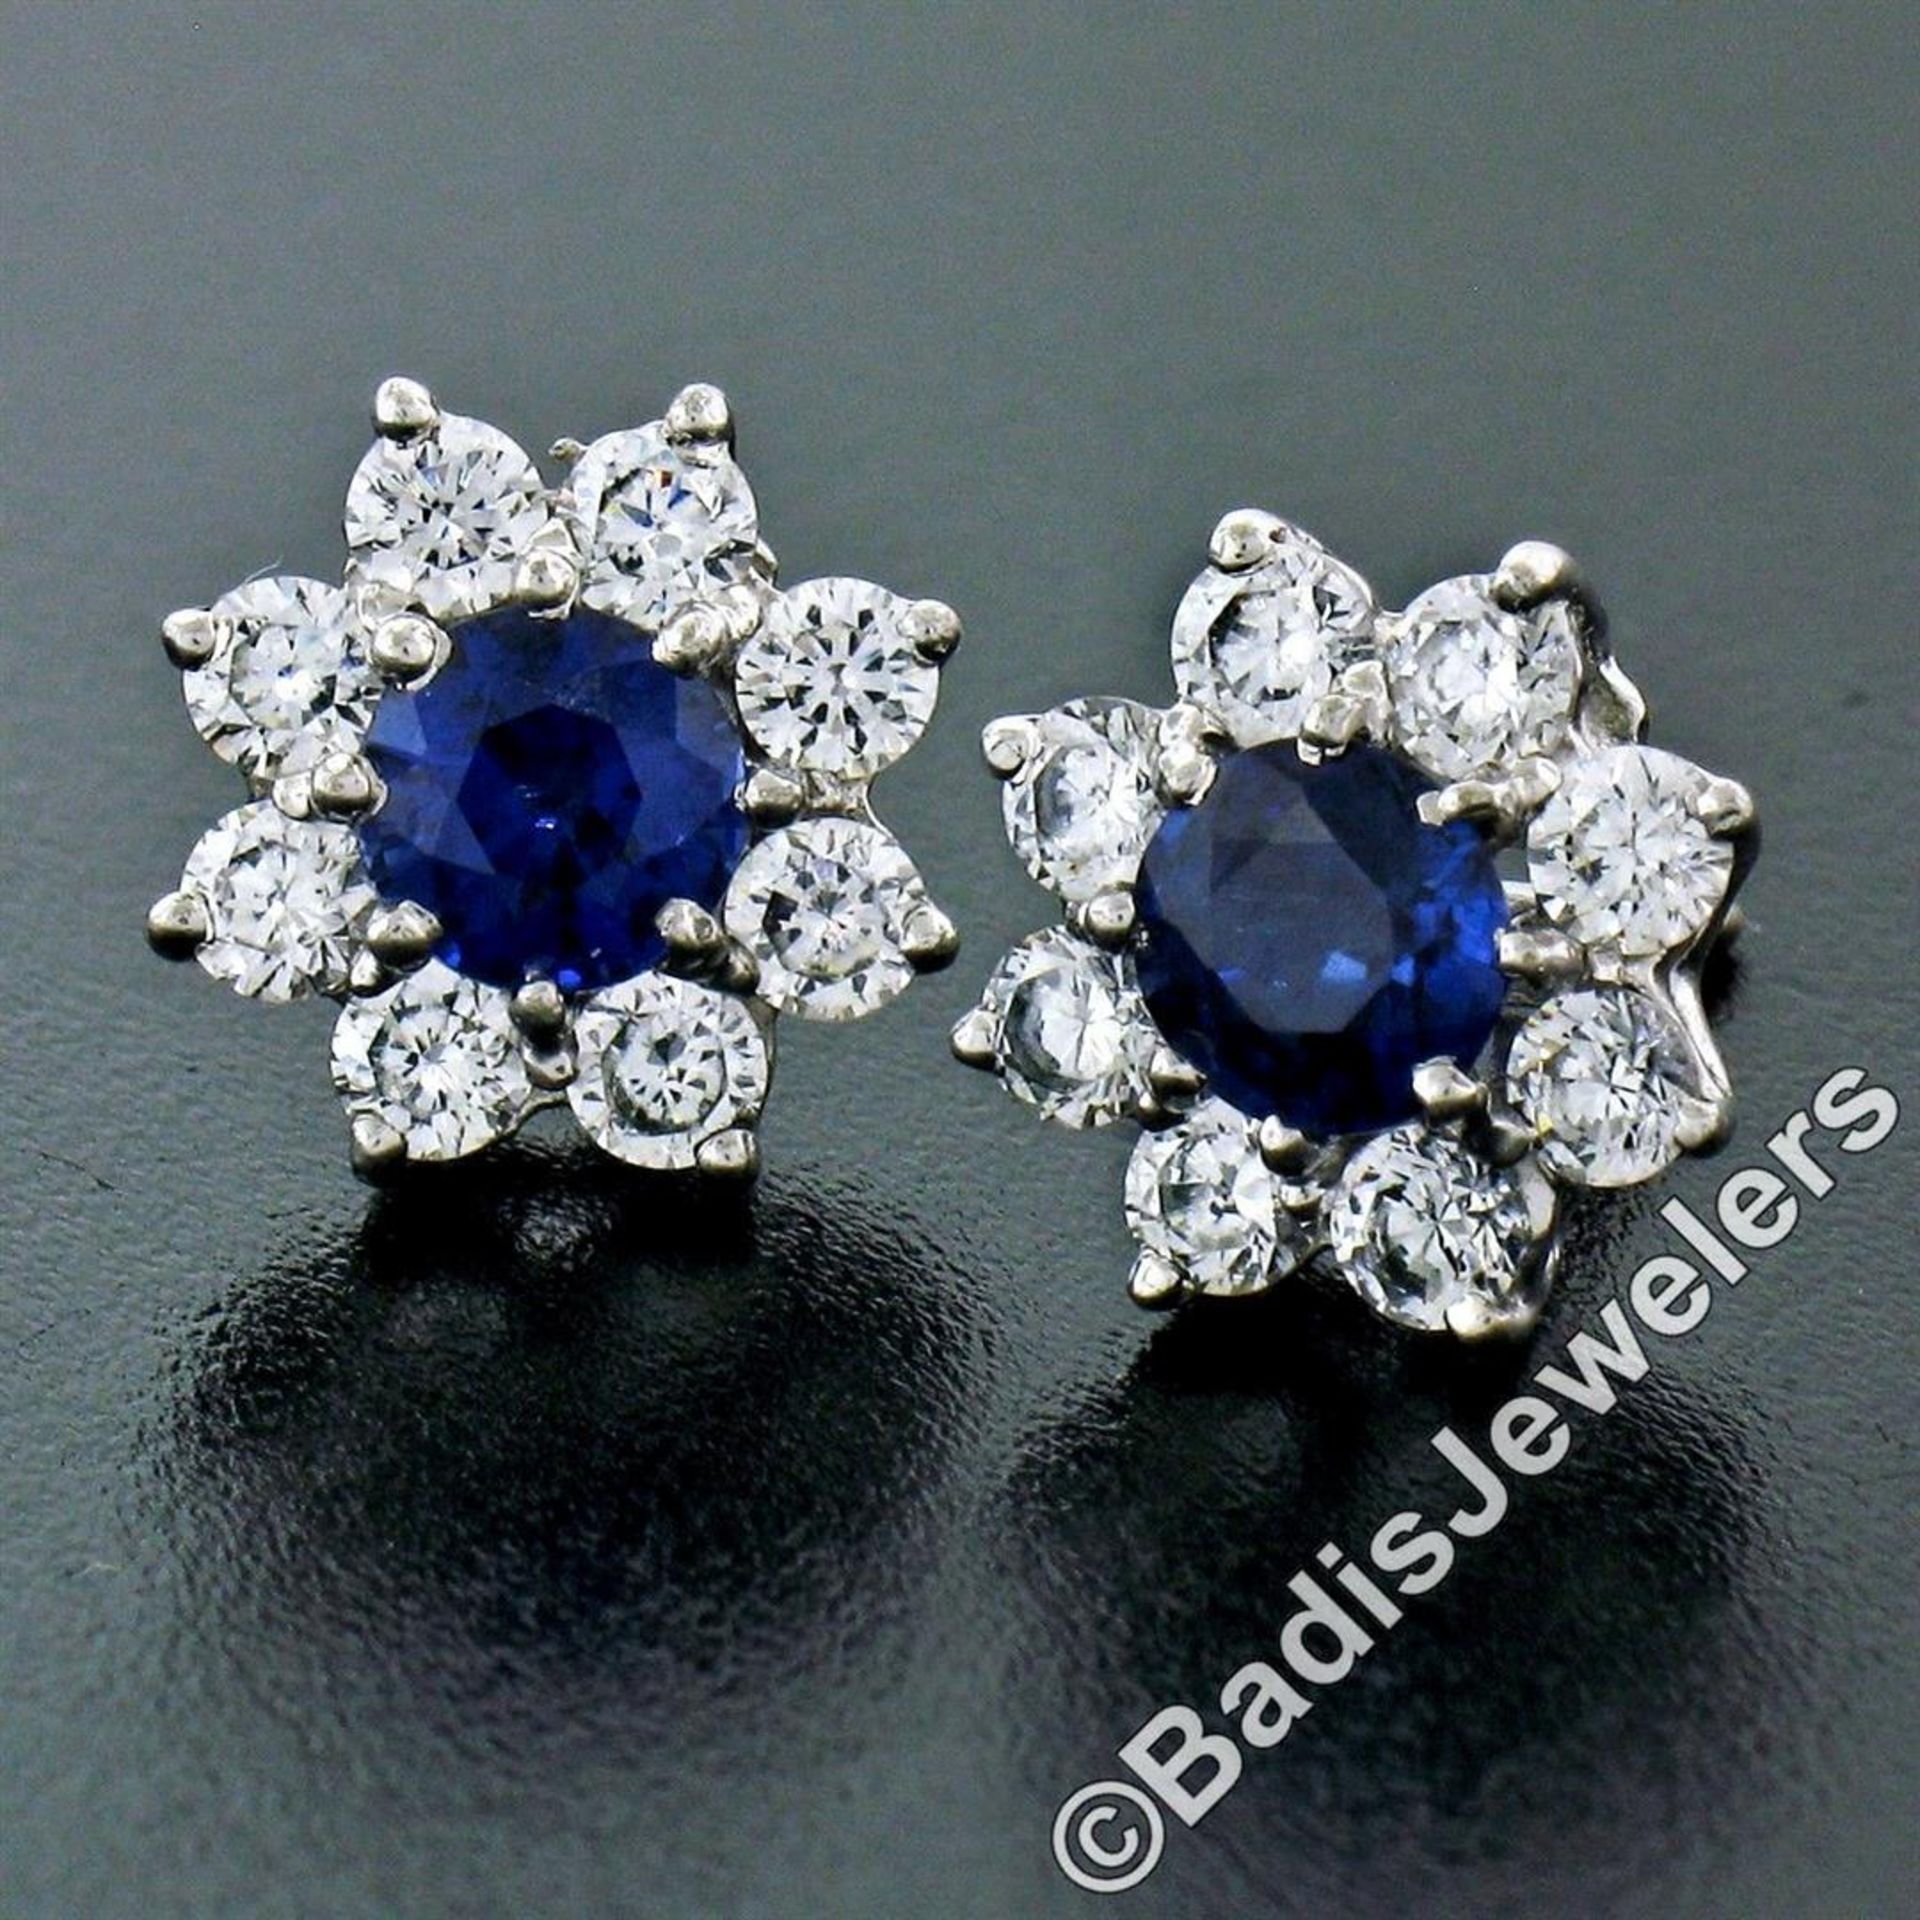 Sterling Silver Blue Crystal & CZ Halo Stud Earrings w/ 14kt White Gold Posts - Image 2 of 5